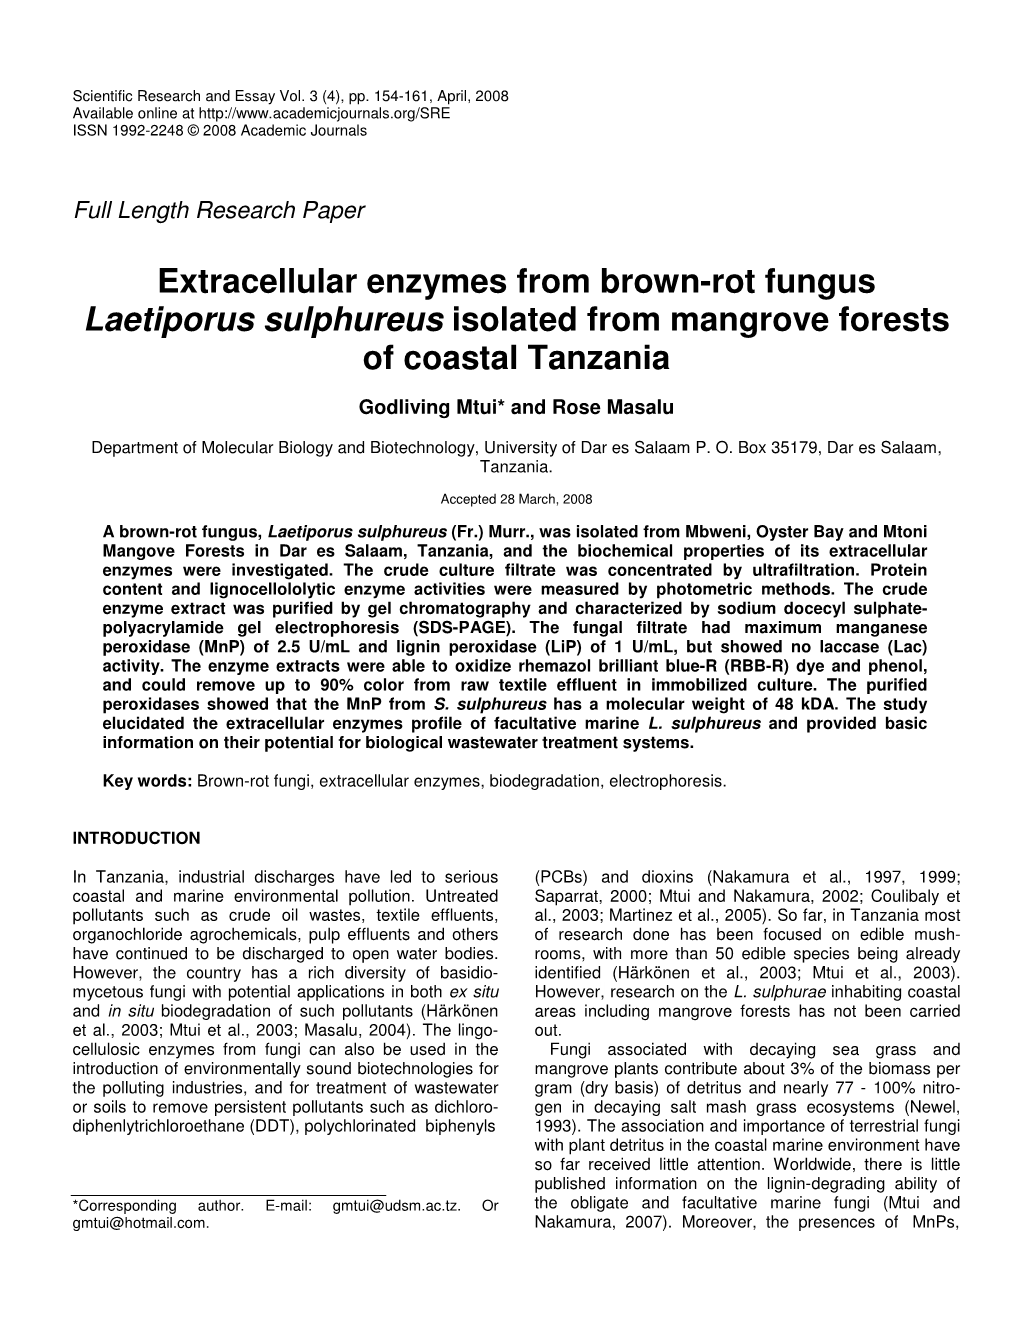 Extracellular Enzymes from Brown-Rot Fungus Laetiporus Sulphureus Isolated from Mangrove Forests of Coastal Tanzania